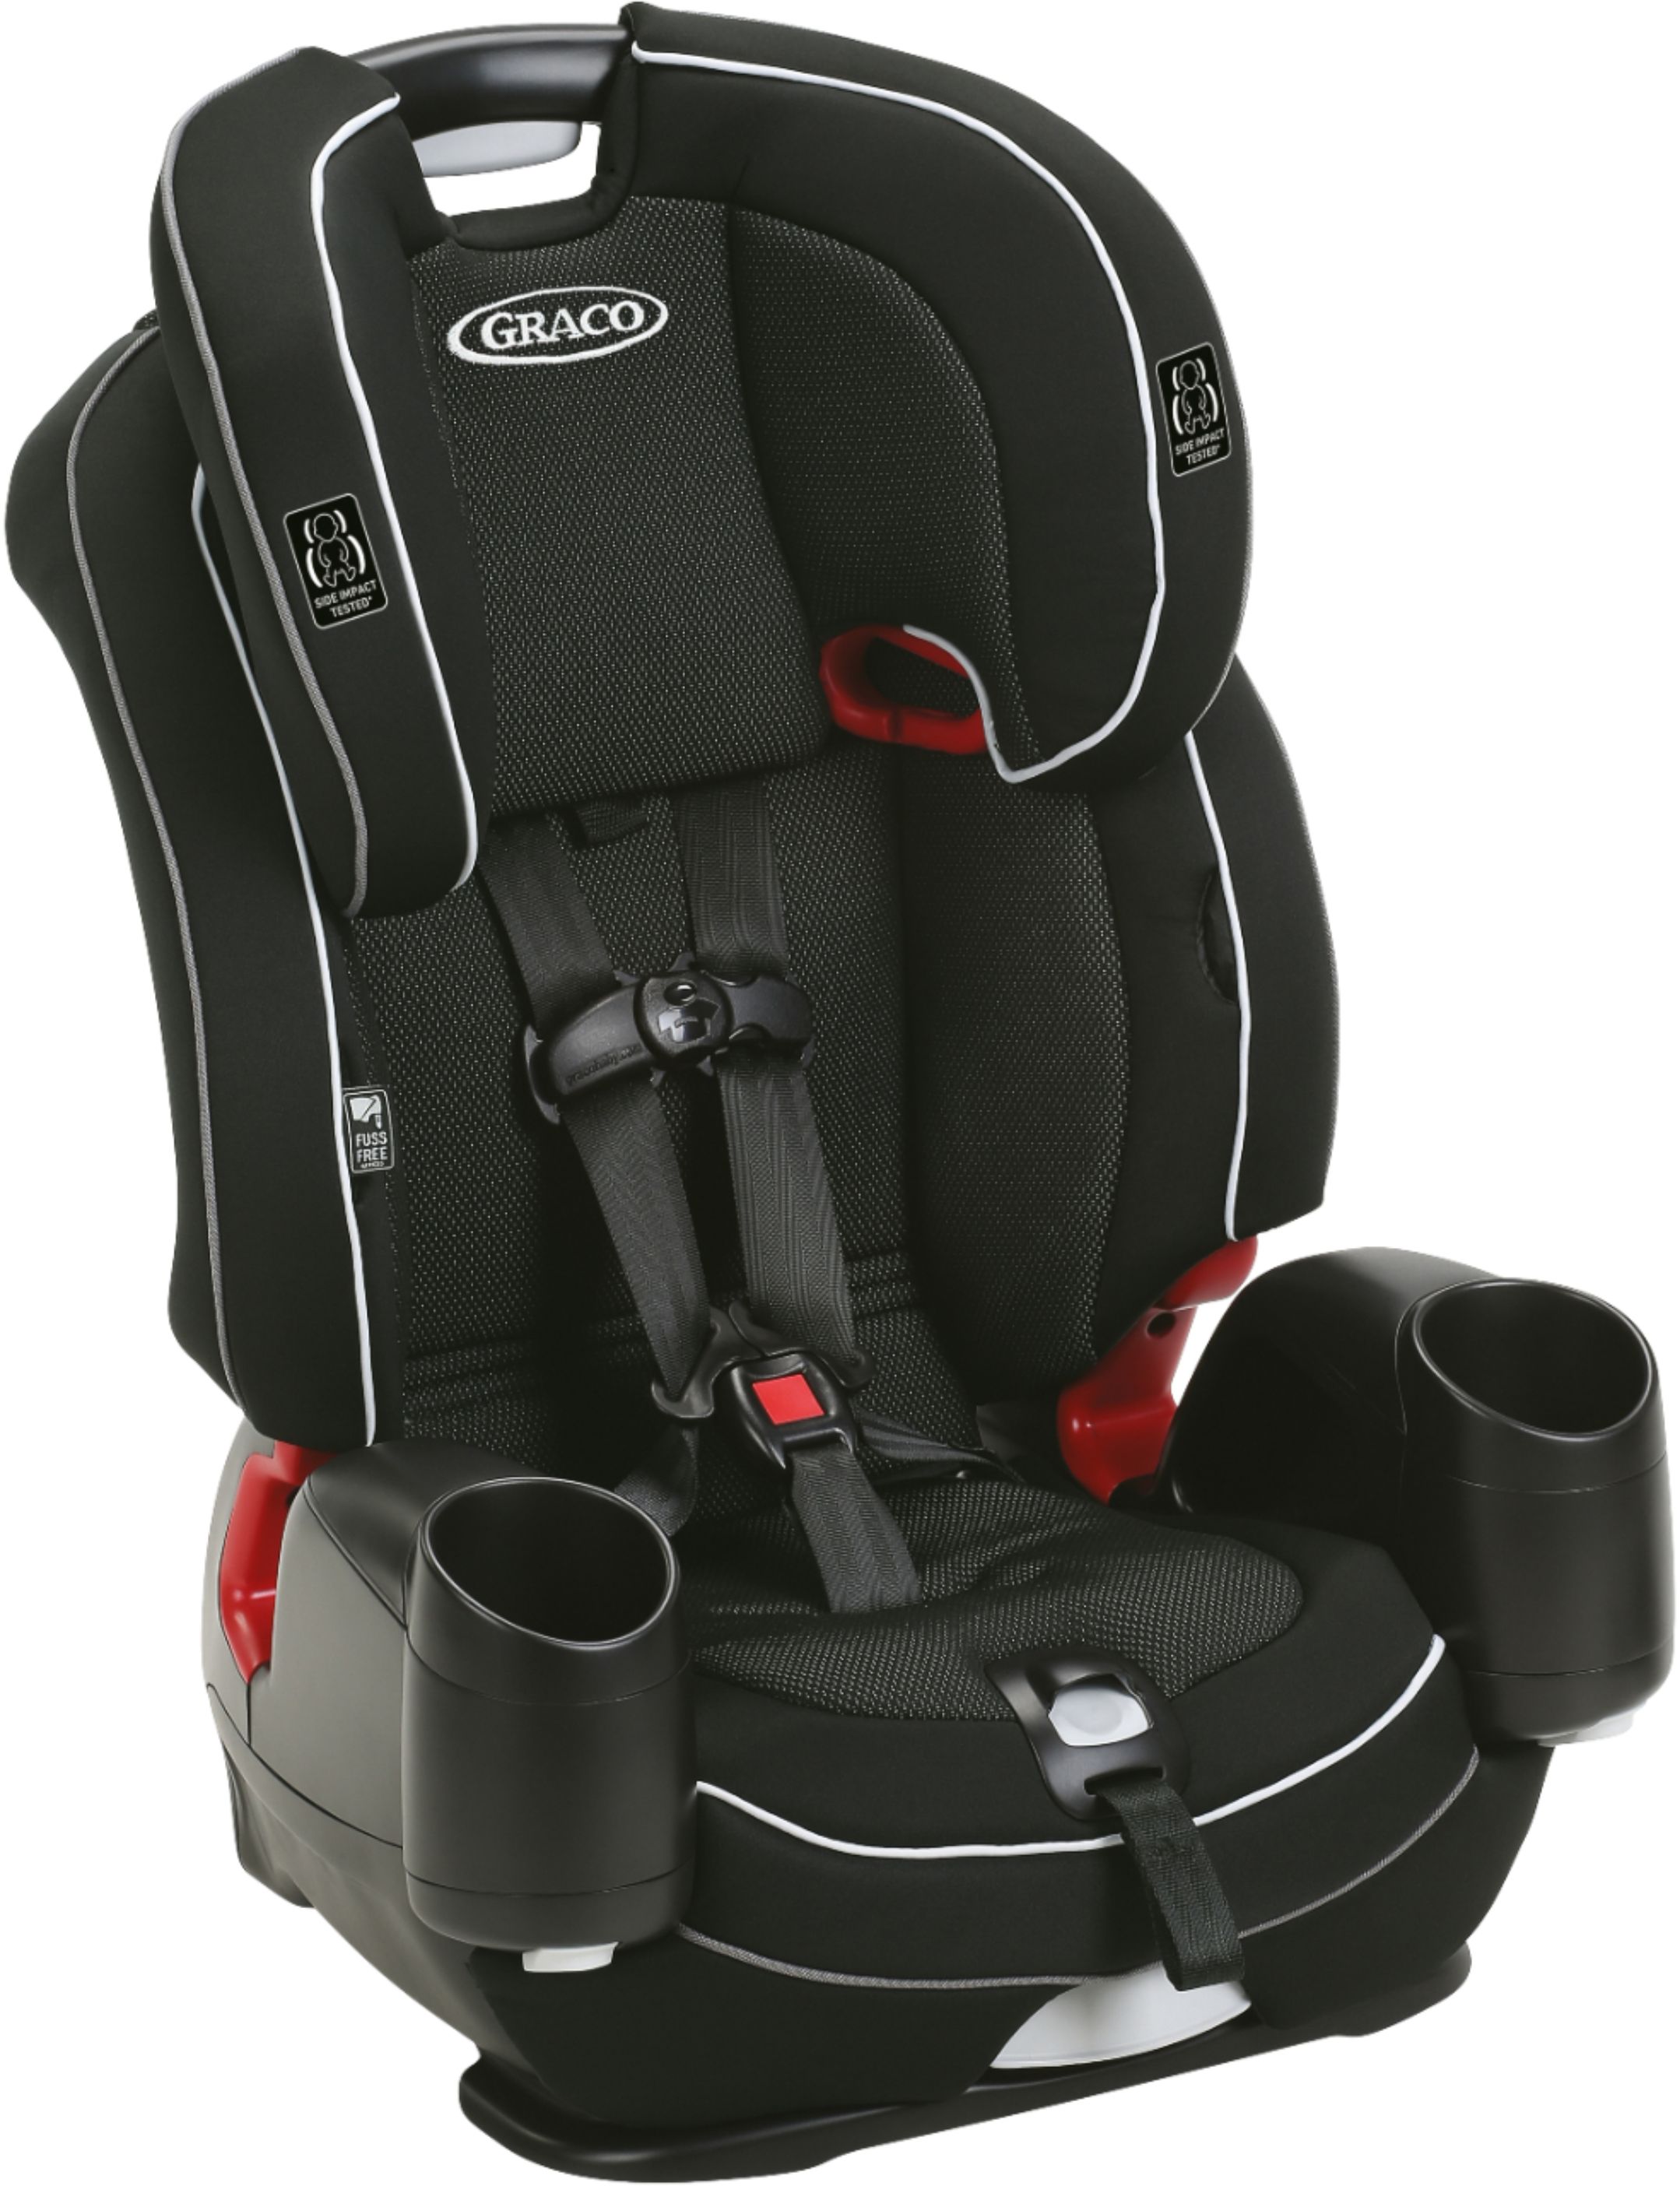 Angle View: Graco - Nautilus SnugLock LX 3-in-1 Harness Booster - Codey